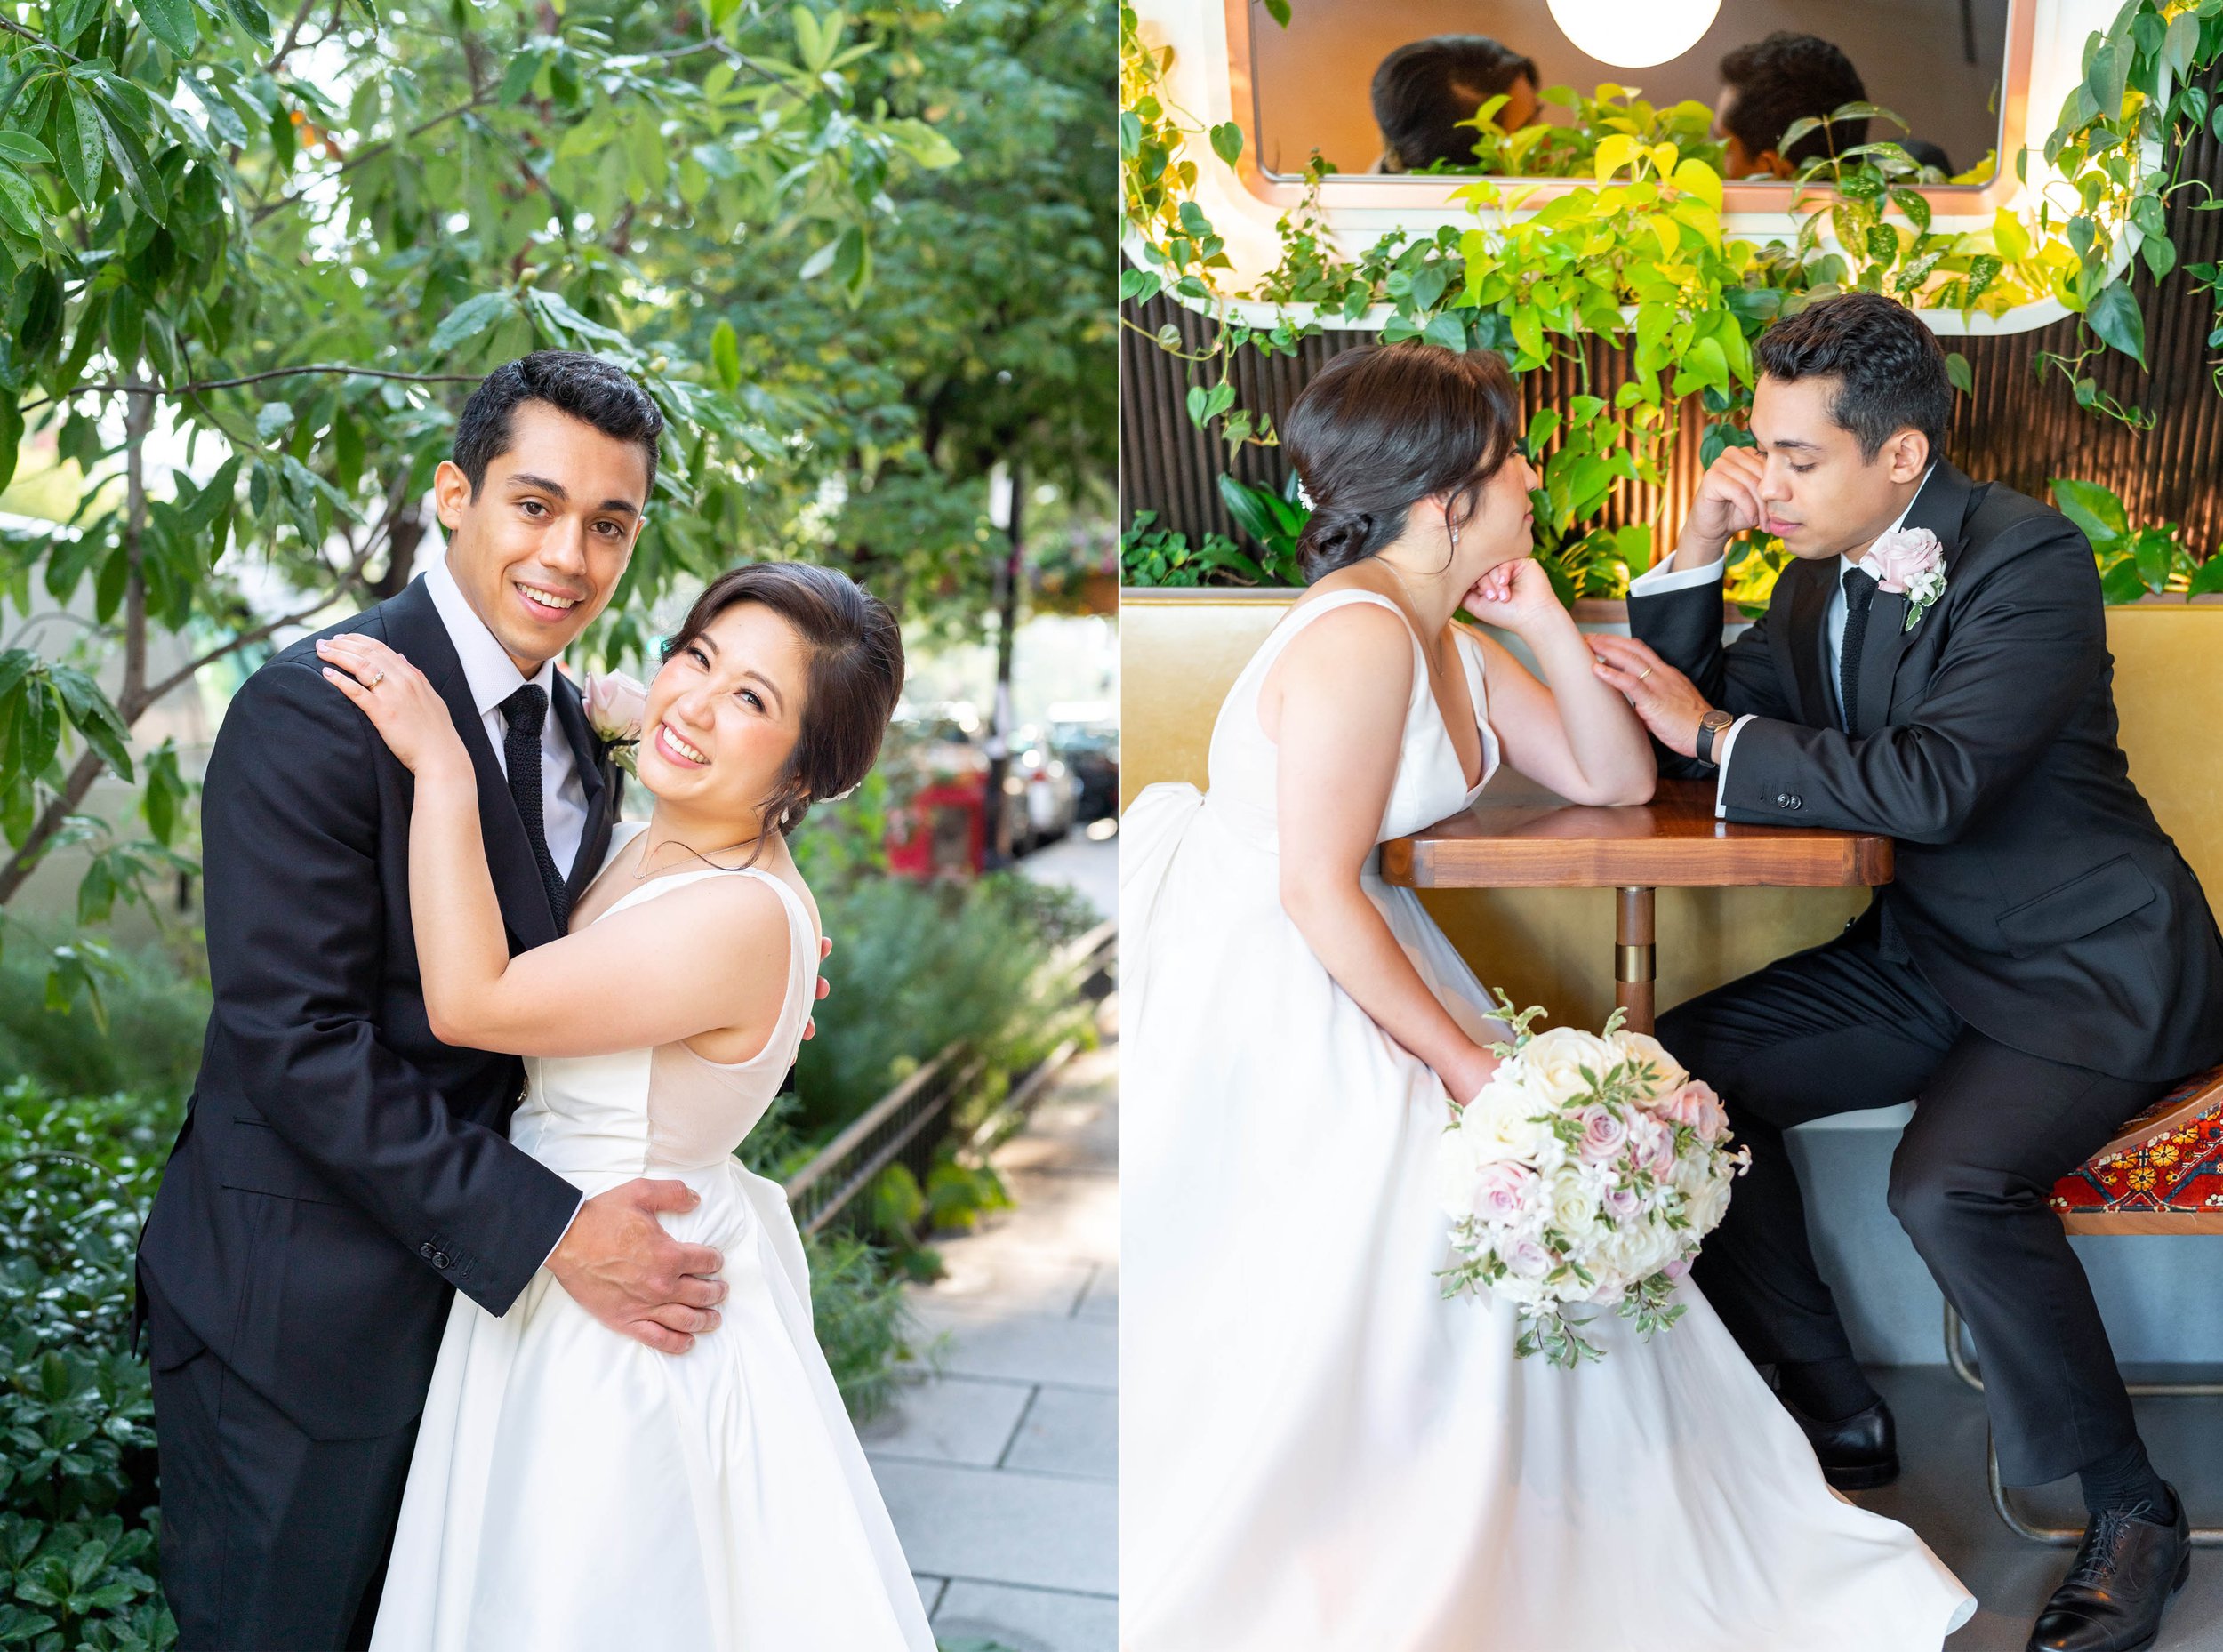 Garden and cafe portraits of bride and groom at the Eaton hotel in Washington DC